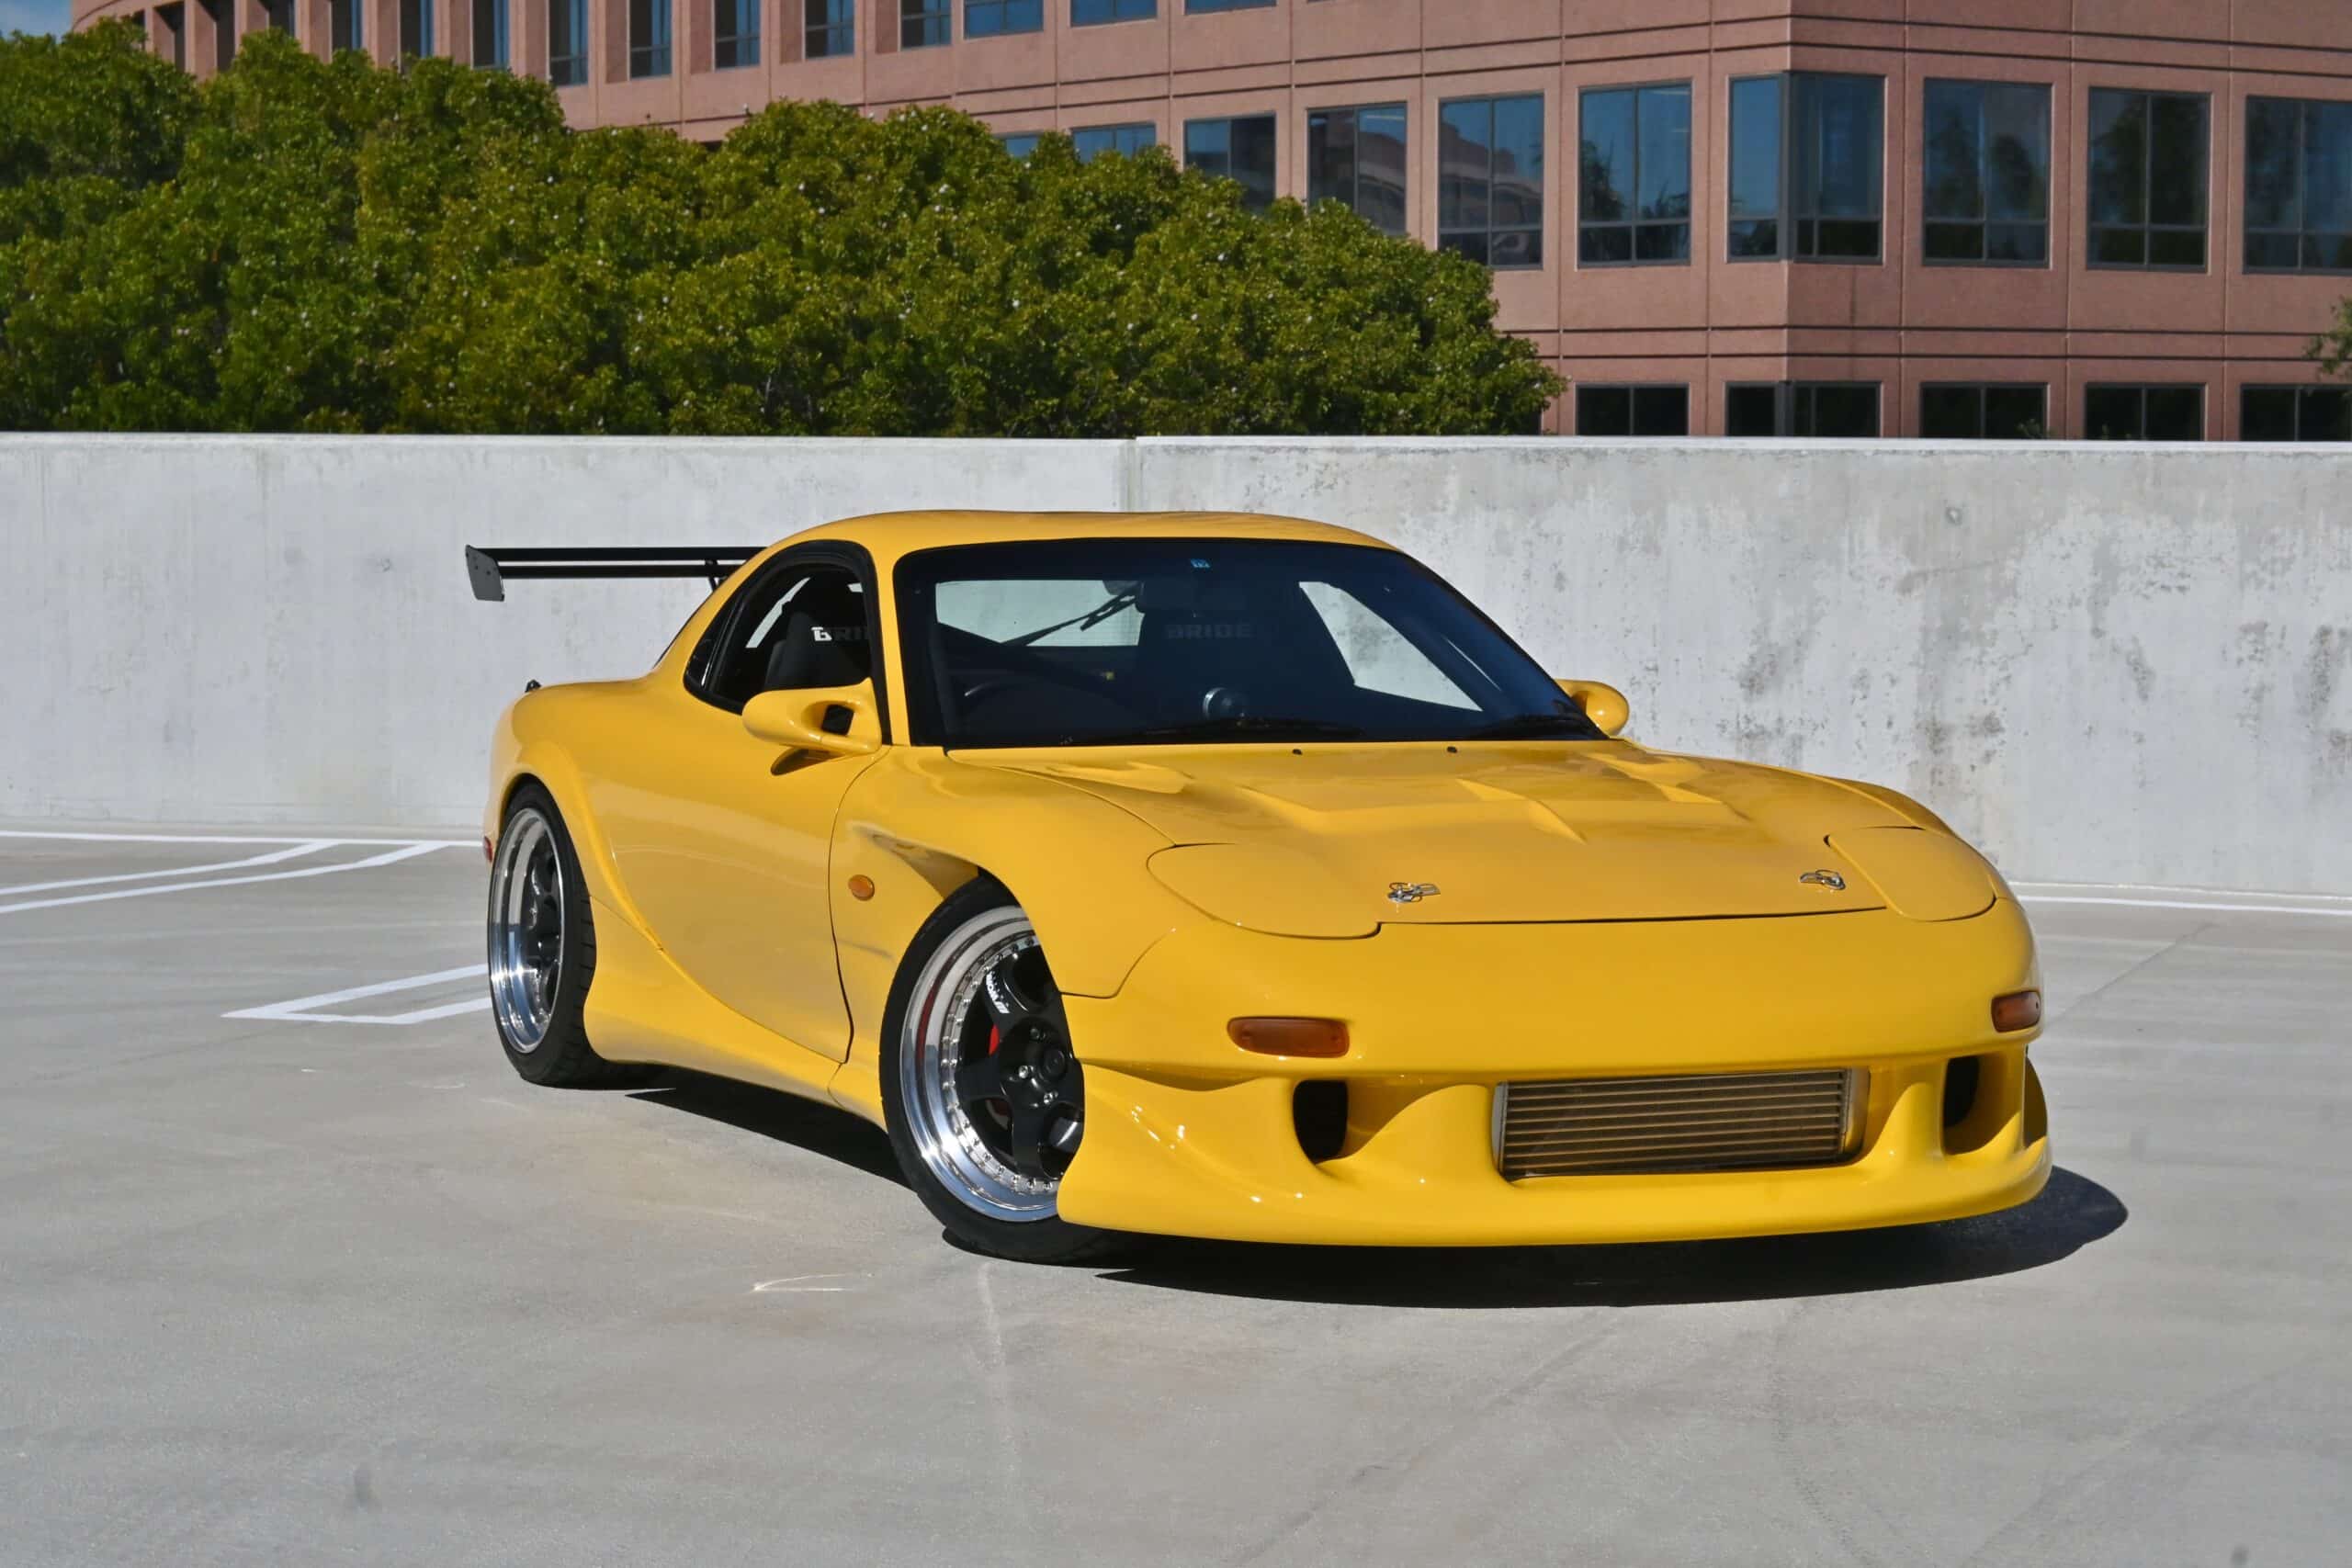 1992 Mazda RX-7 Efini FD3S RE-Ameyiya / T78-33D Single Turbo / Ohlins Coilovers / Work Meister S1 / 500+ HP